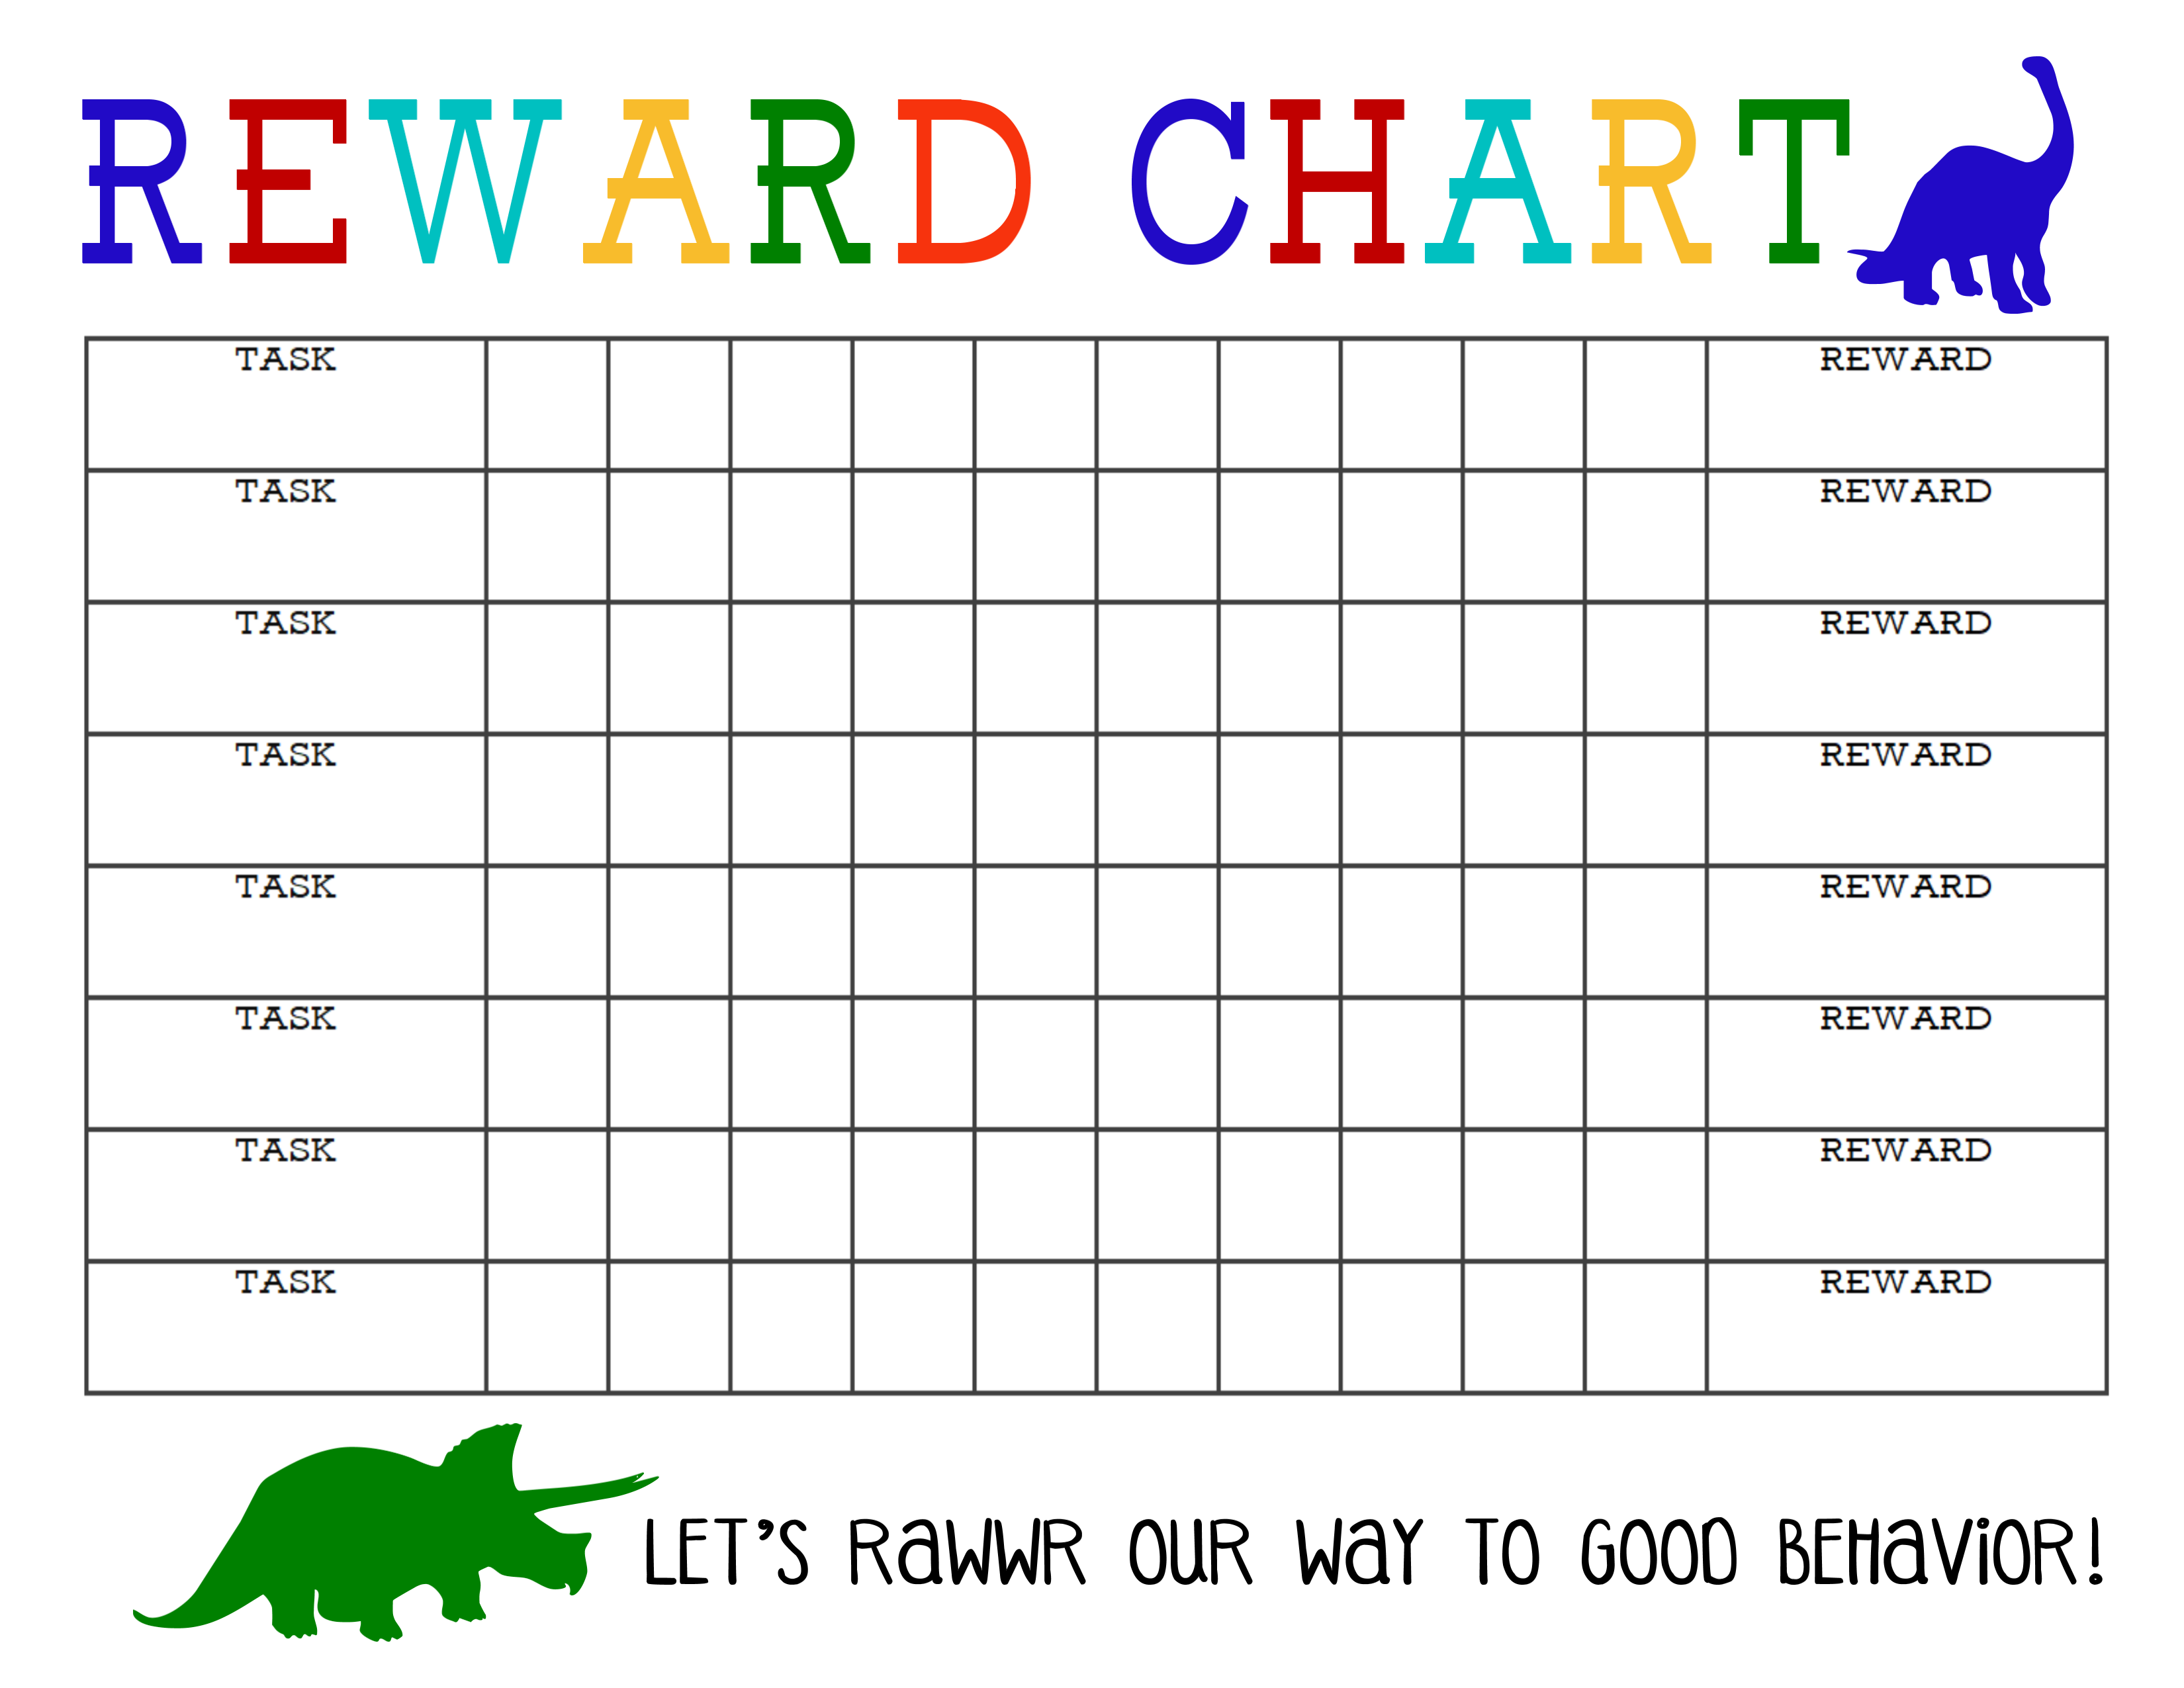 printable-redesigned-but-not-my-own-design-reward-chart-kids